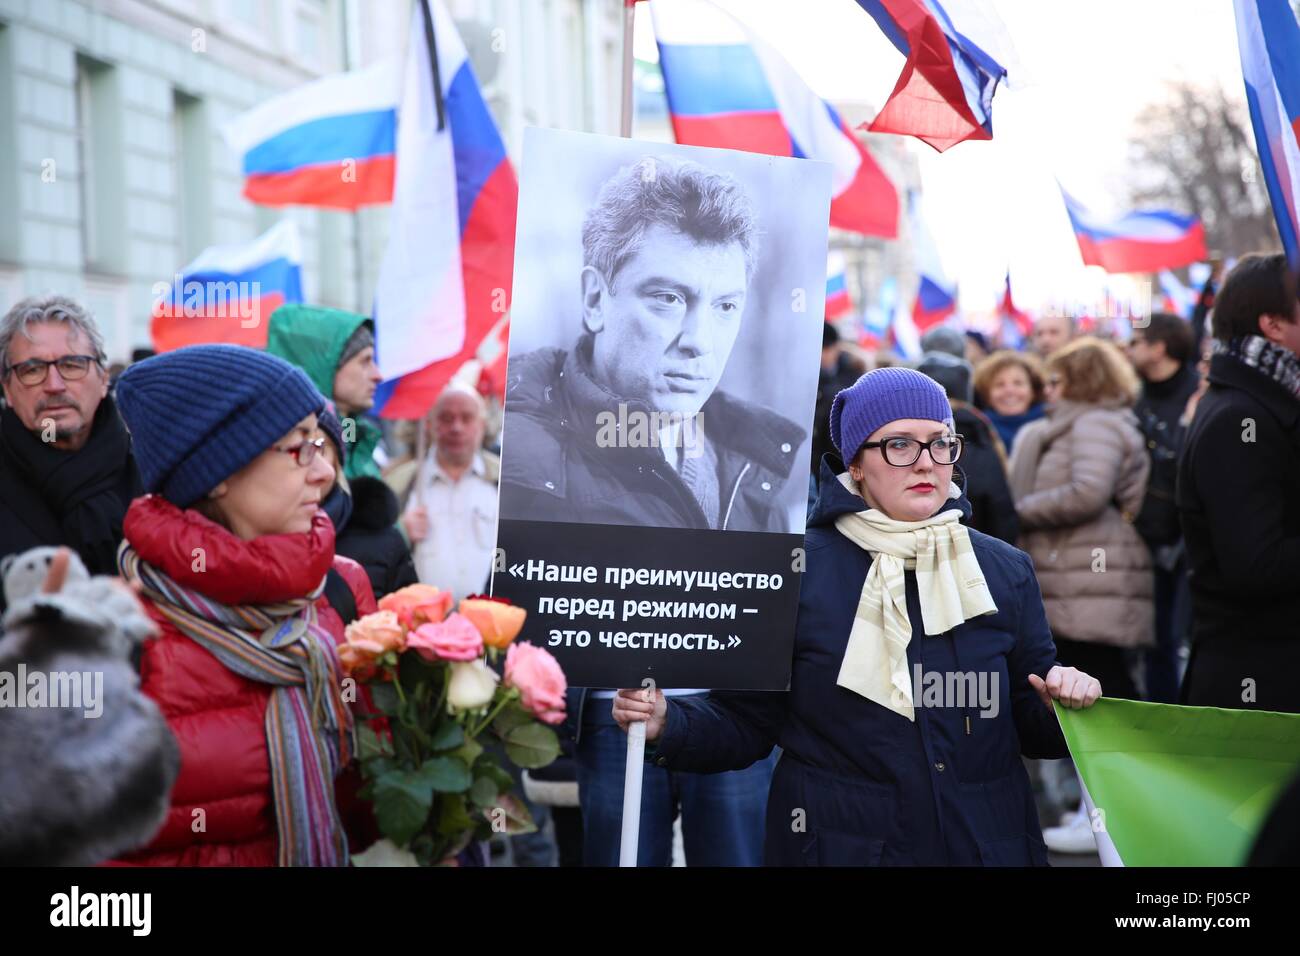 Moscow, Russia. 27th Feb, 2016. A woman holds a banner reading 'Honest is our superiority before system' during a march in memory of Russian opposition politician Boris Nemtsov on the first anniversary of his murder in Moscow, Russia, on Feb. 27, 2016. About 50,000 mourners of Nemtsov gathered here on Saturday for a mass march. Nemtsov, former Russian deputy prime minister and an outspoken critic of President Vladimir Putin, was shot dead at about midnight on Feb. 27, 2015 near the Kremlin. Credit:  Bai Xueqi/Xinhua/Alamy Live News Stock Photo